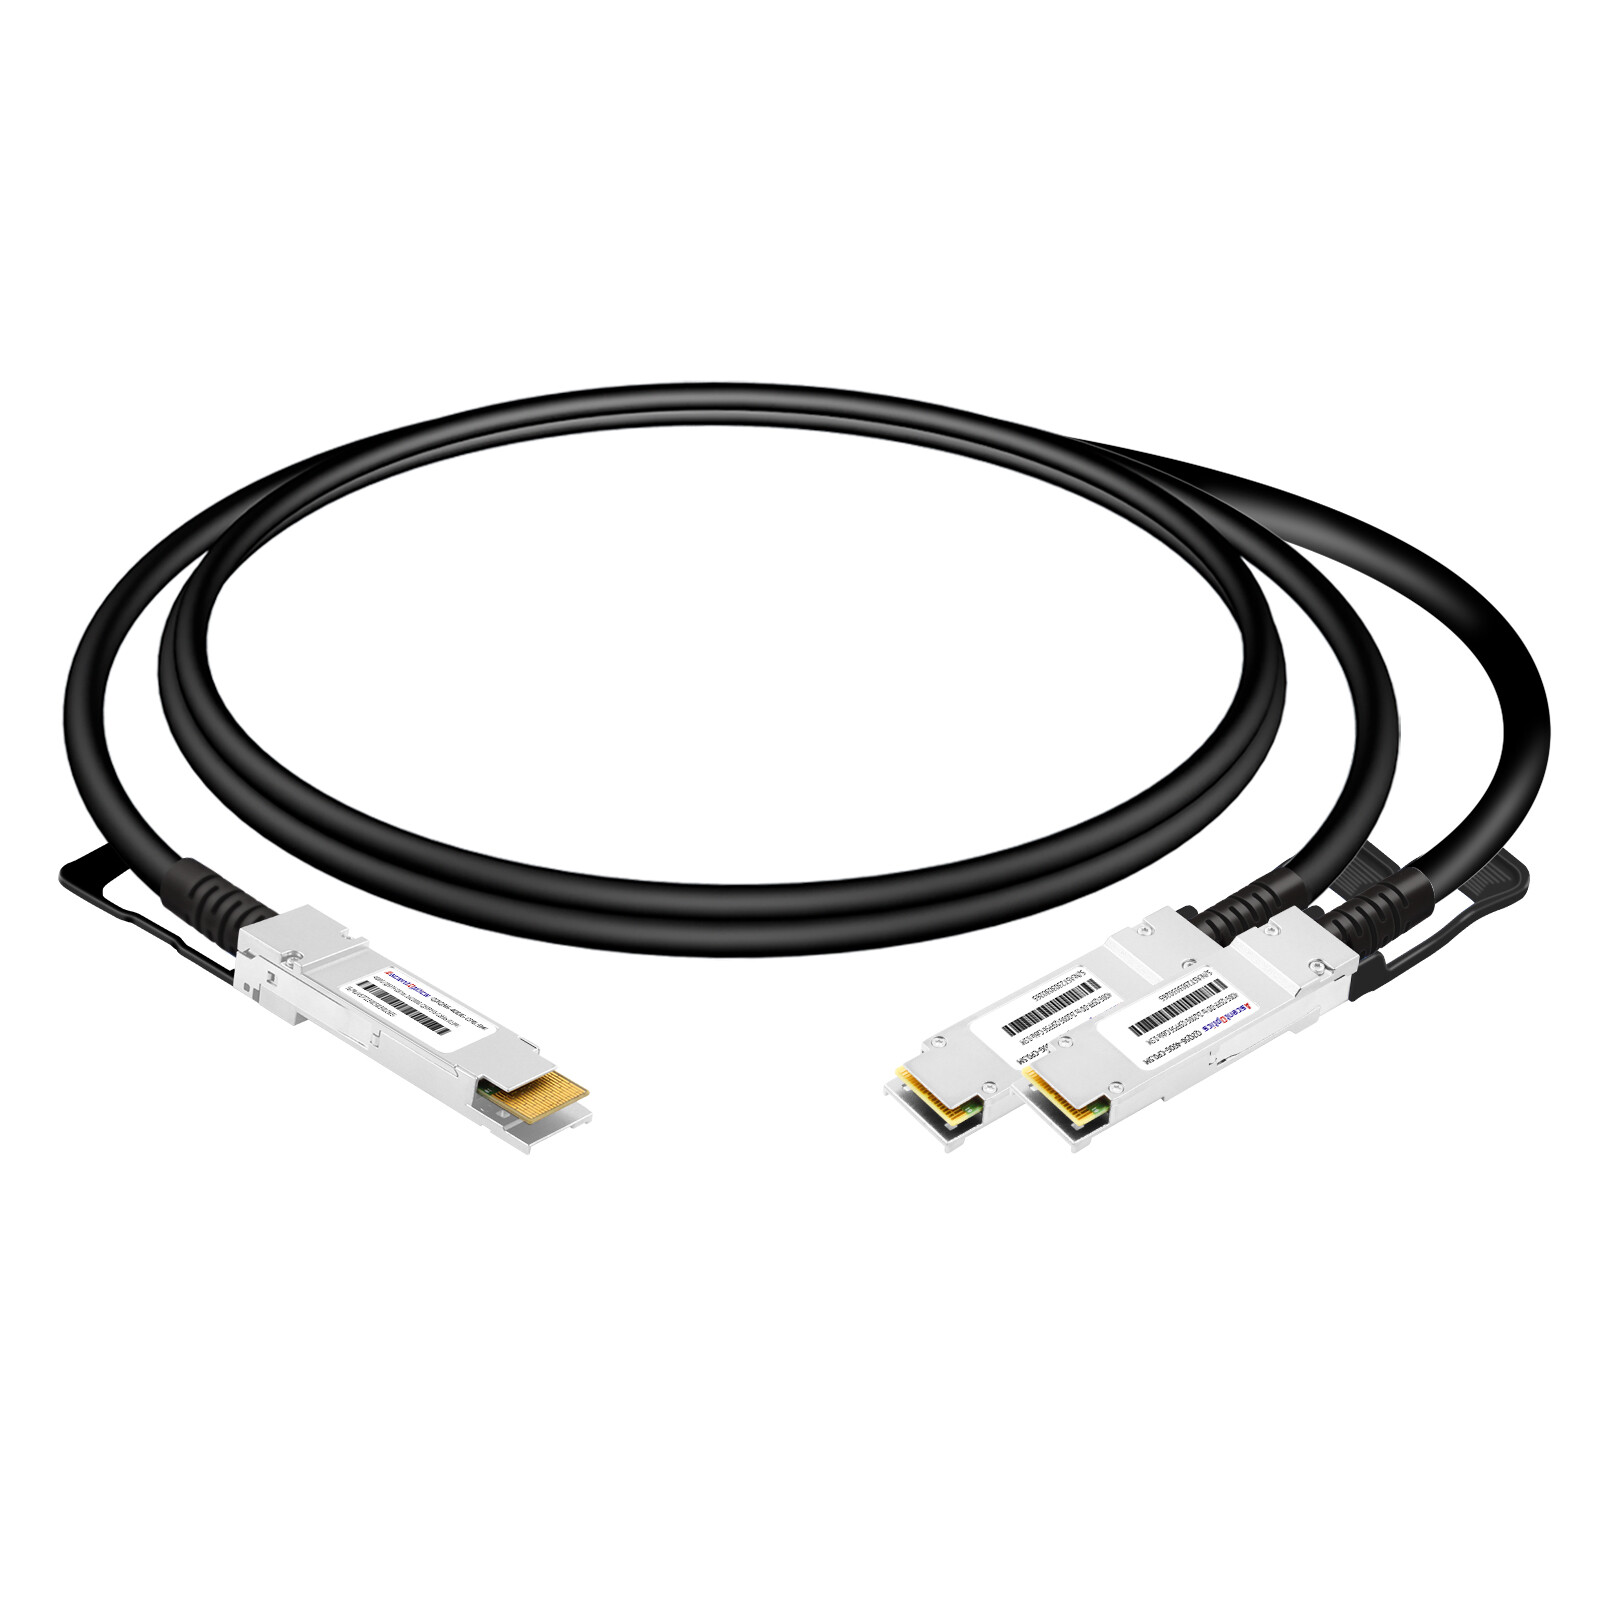 400G QSFP-DD to 4x 100G SFP-DD Copper Breakout Cable,0.5 Meter,Passive